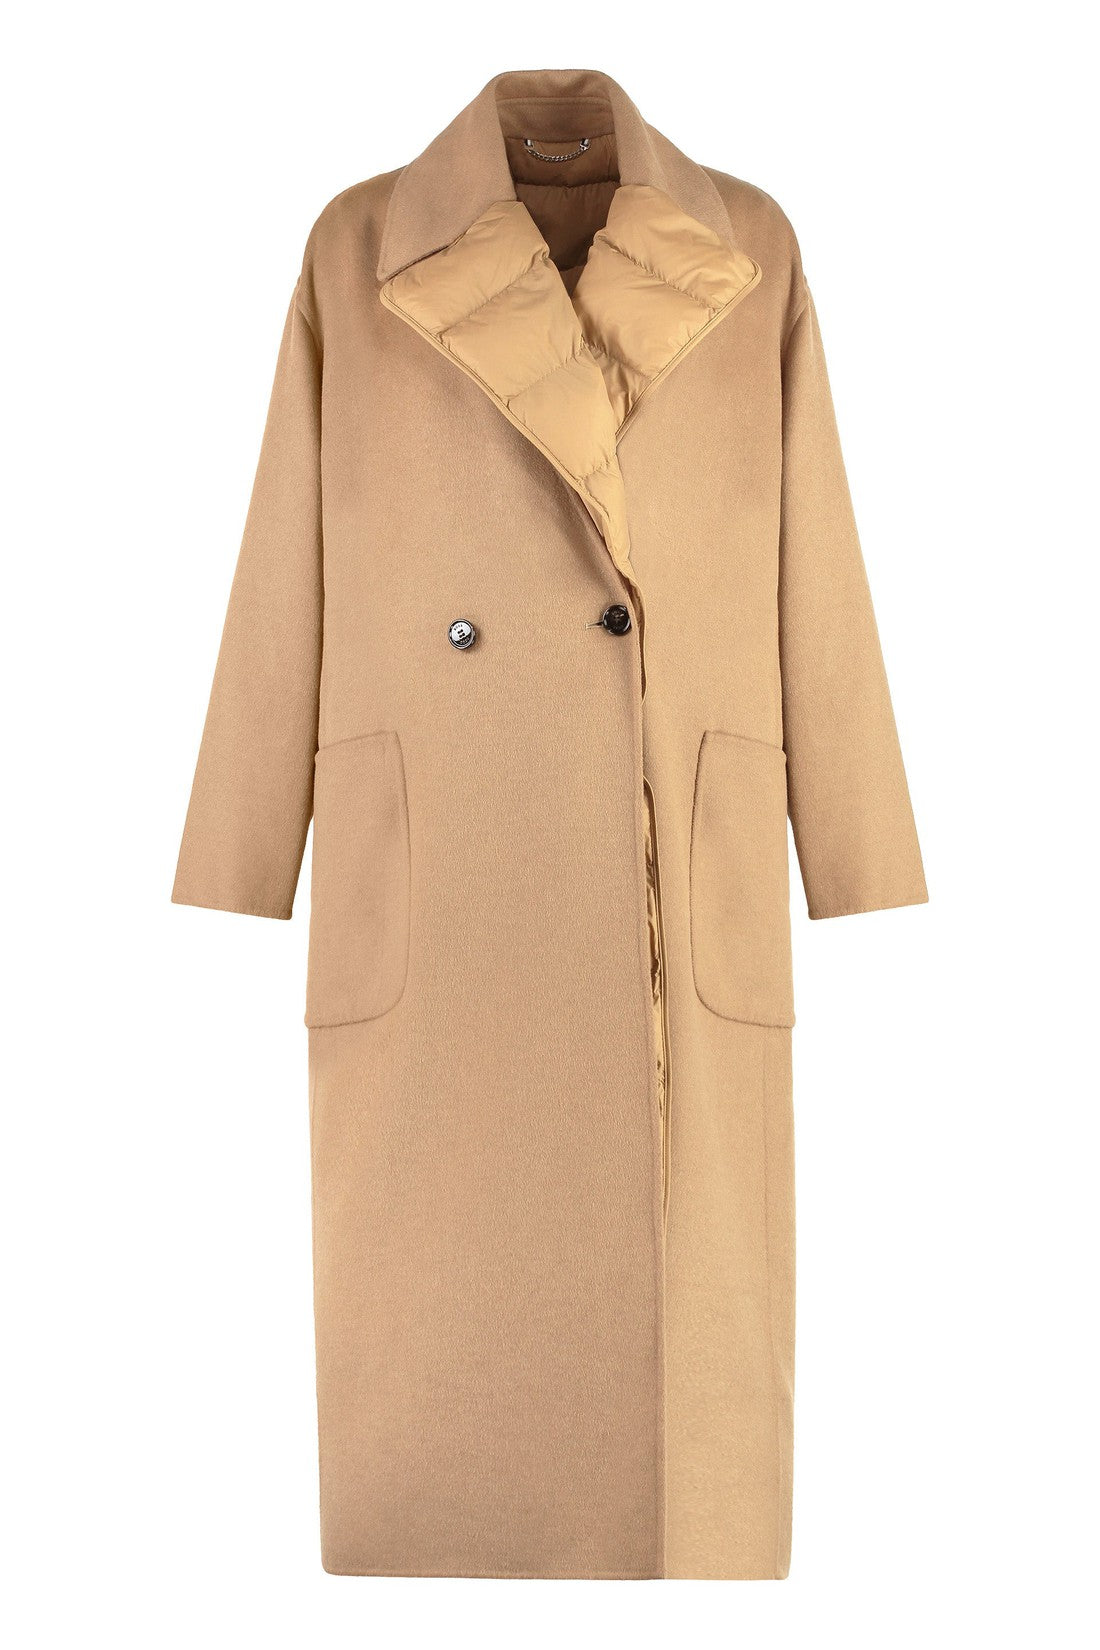 BOSS-OUTLET-SALE-Callim coat with removable inner vest-ARCHIVIST